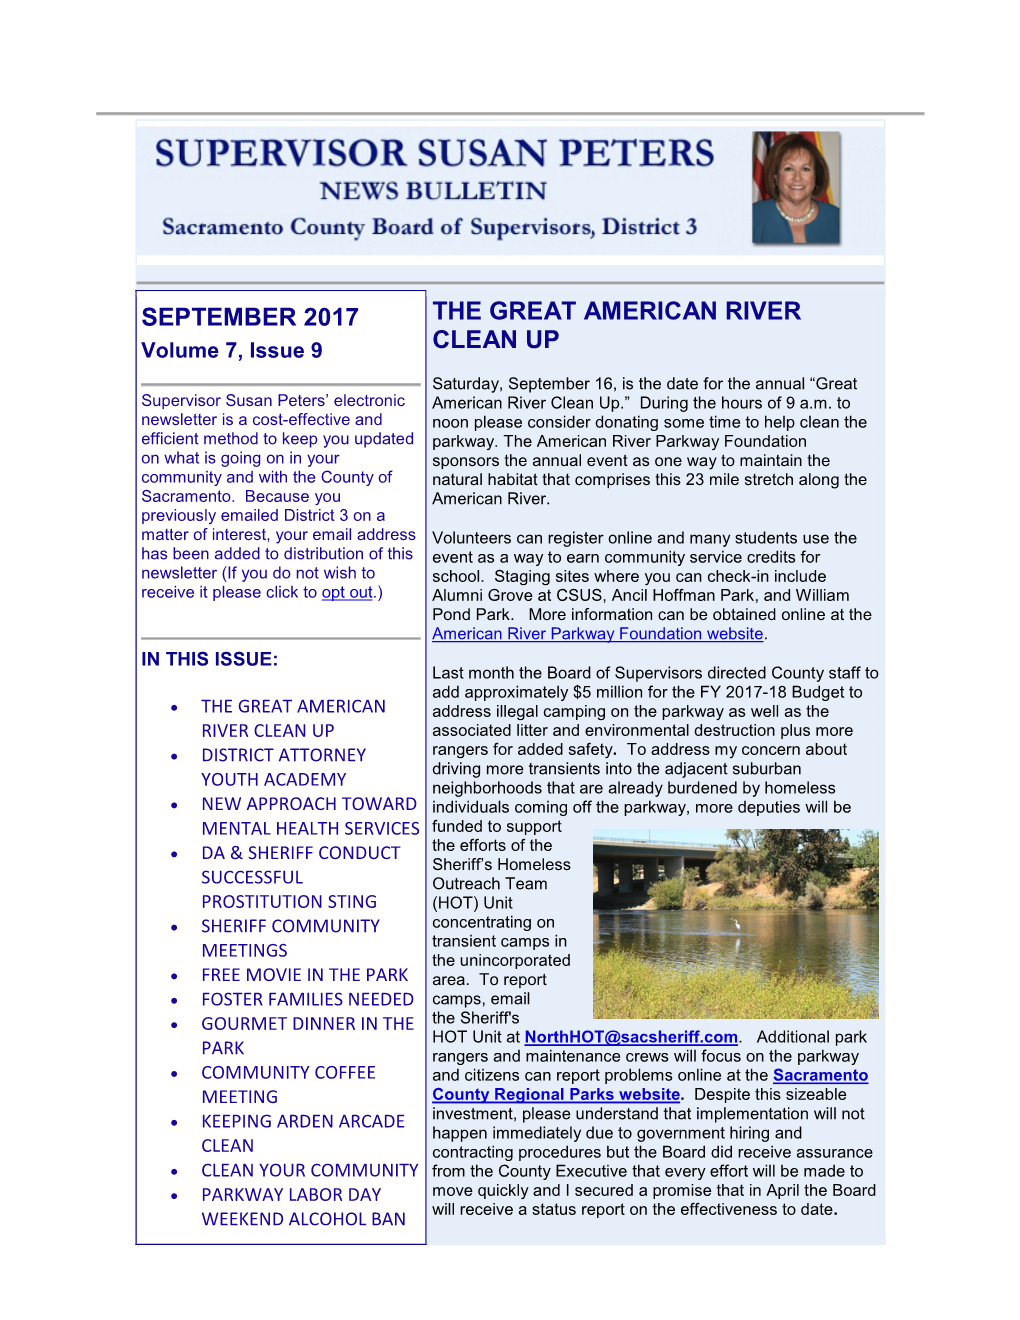 September 2017 the Great American River Clean Up